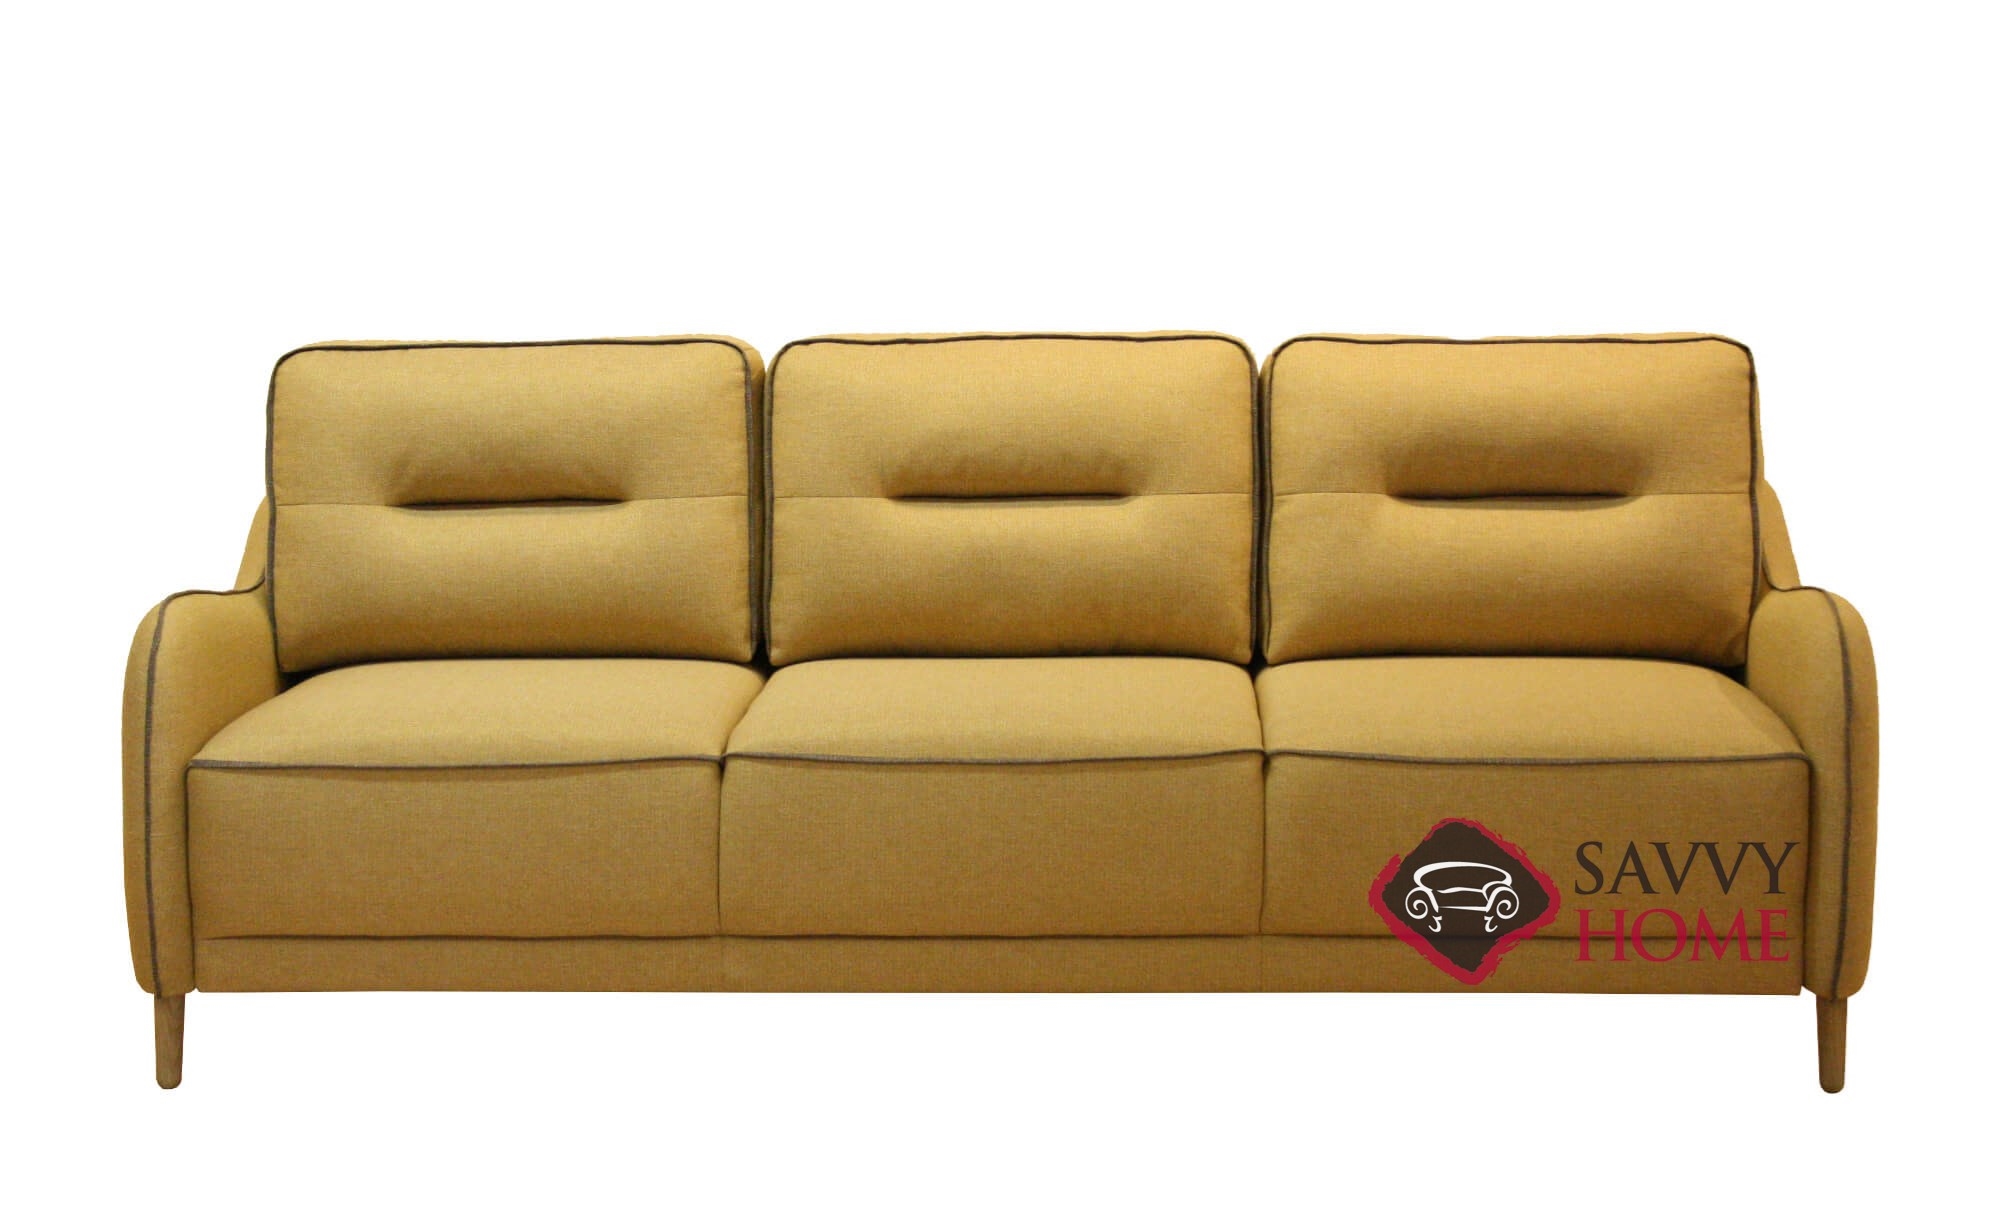  Puff  Fabric Sleeper Sofas  Full by Luonto is Fully 